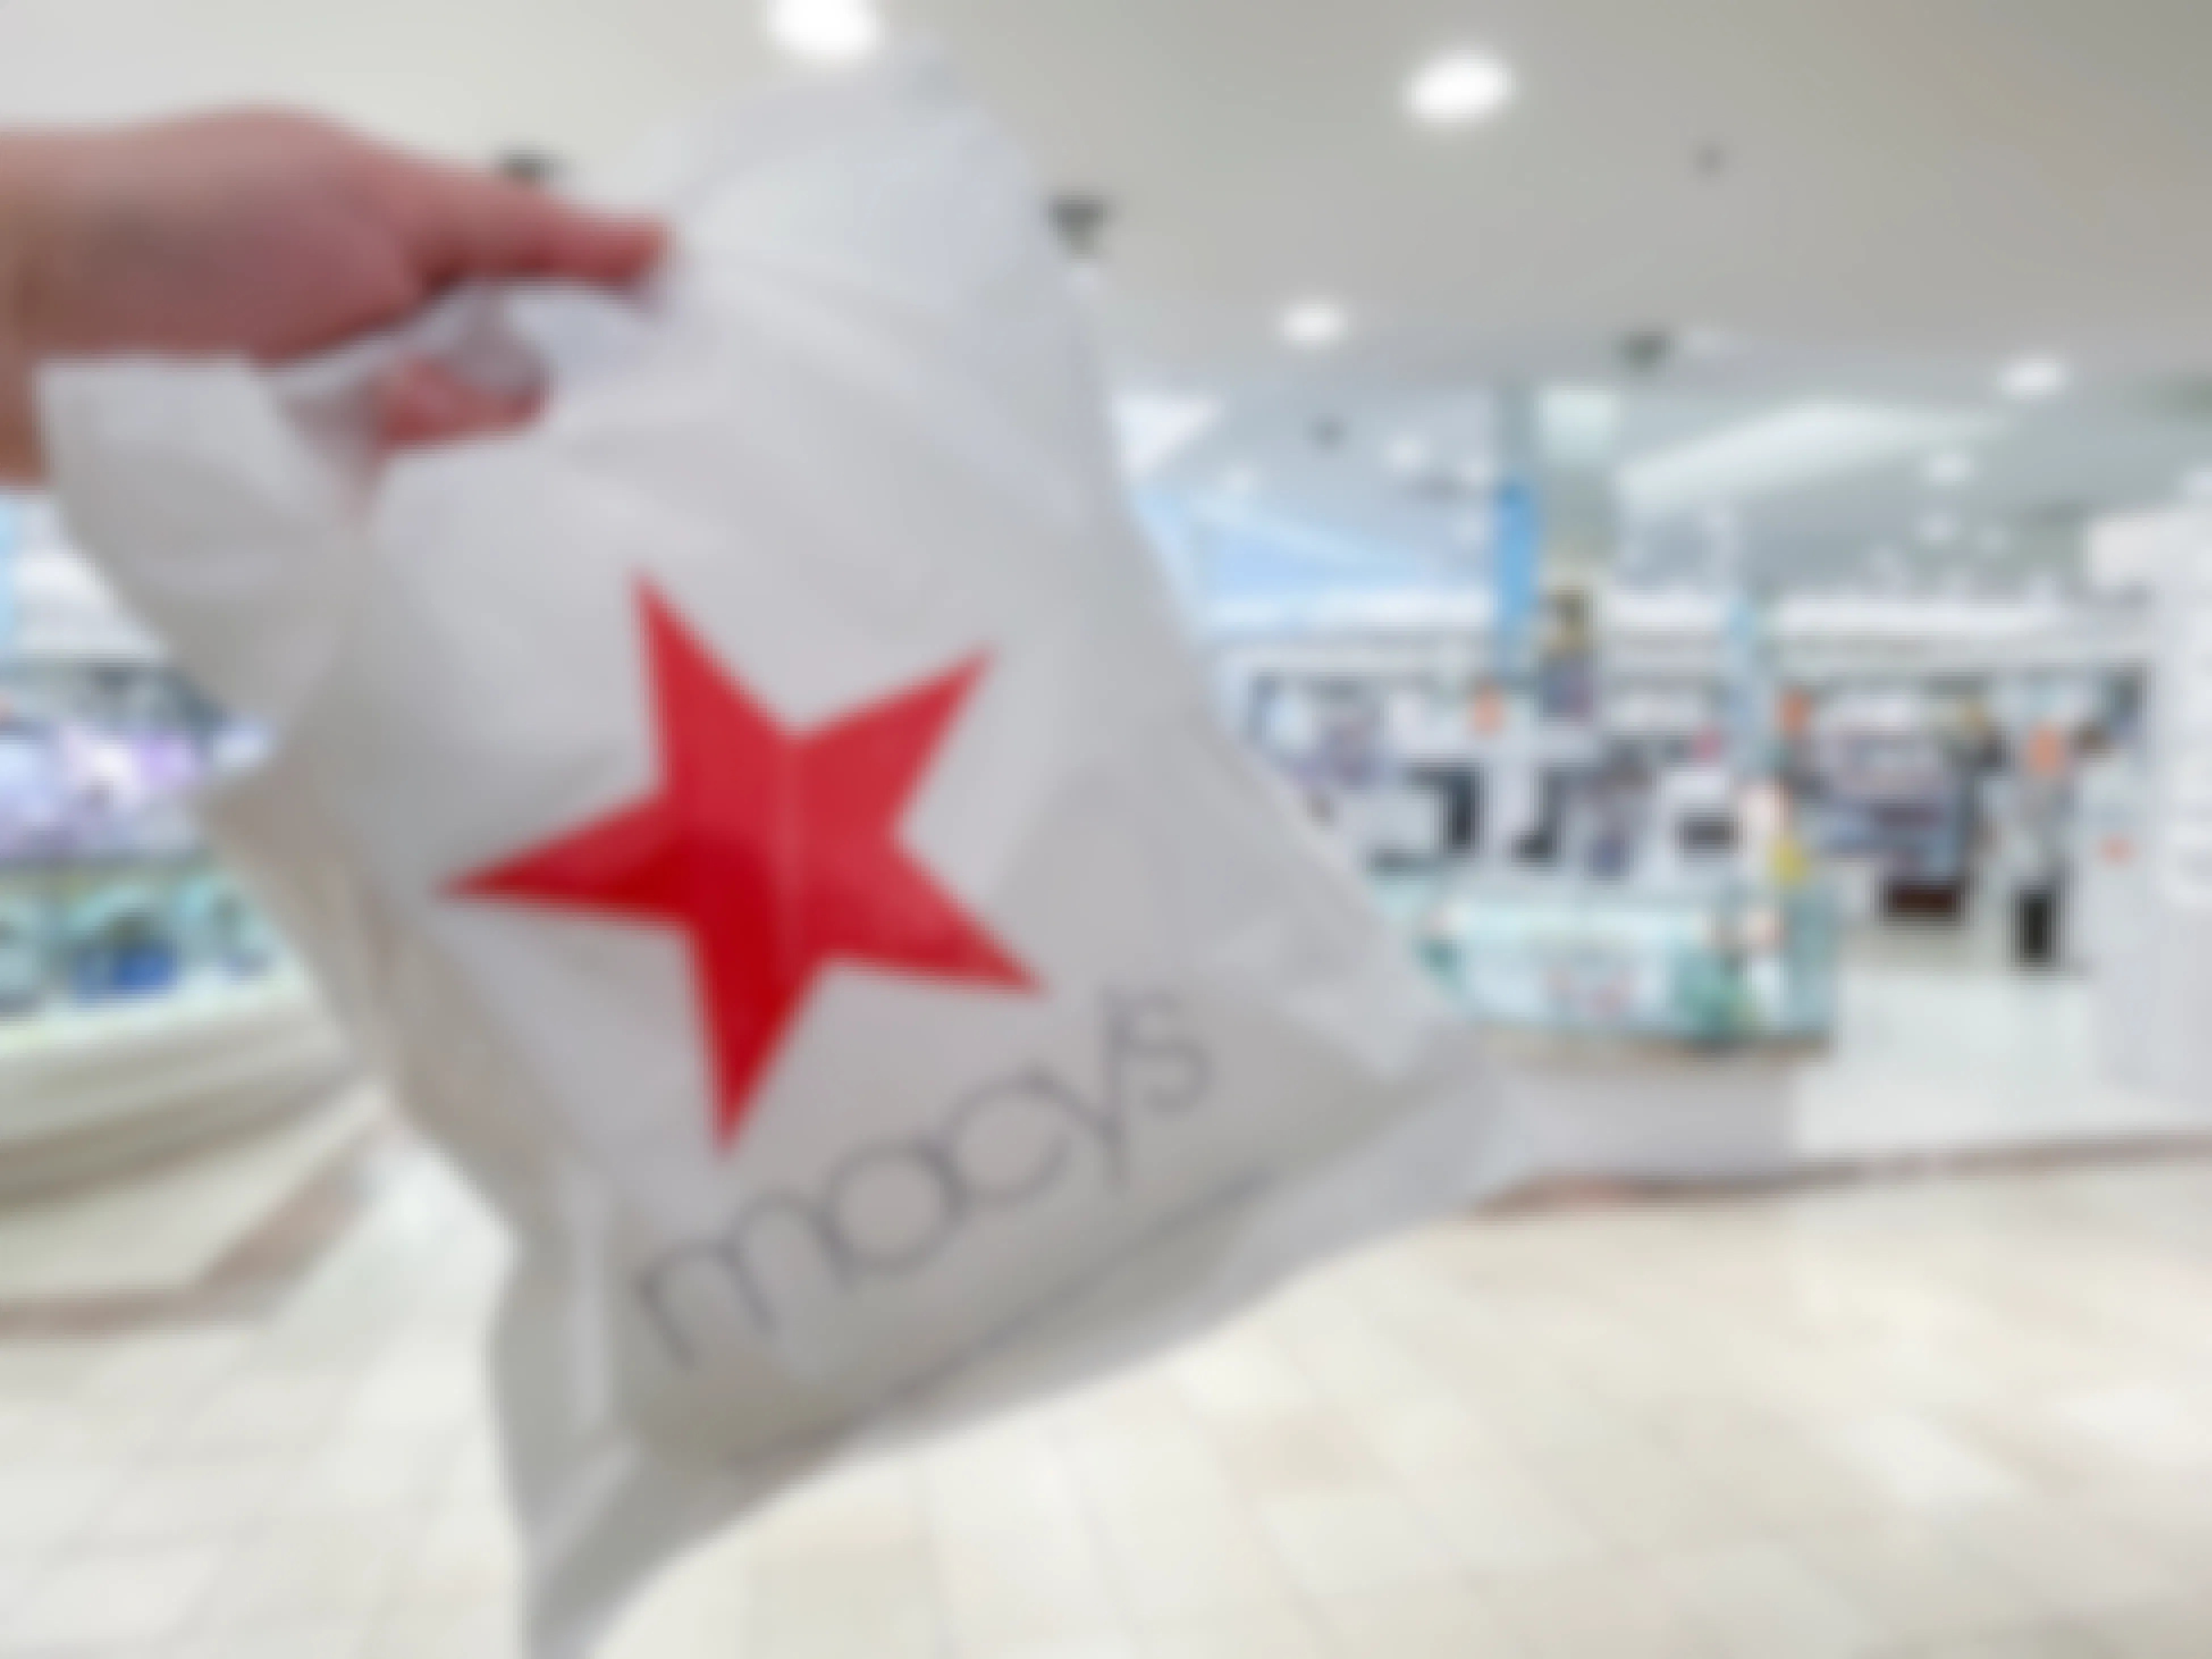 A Macy's shopping bag held in front of the cosmetic section inside Macy's.